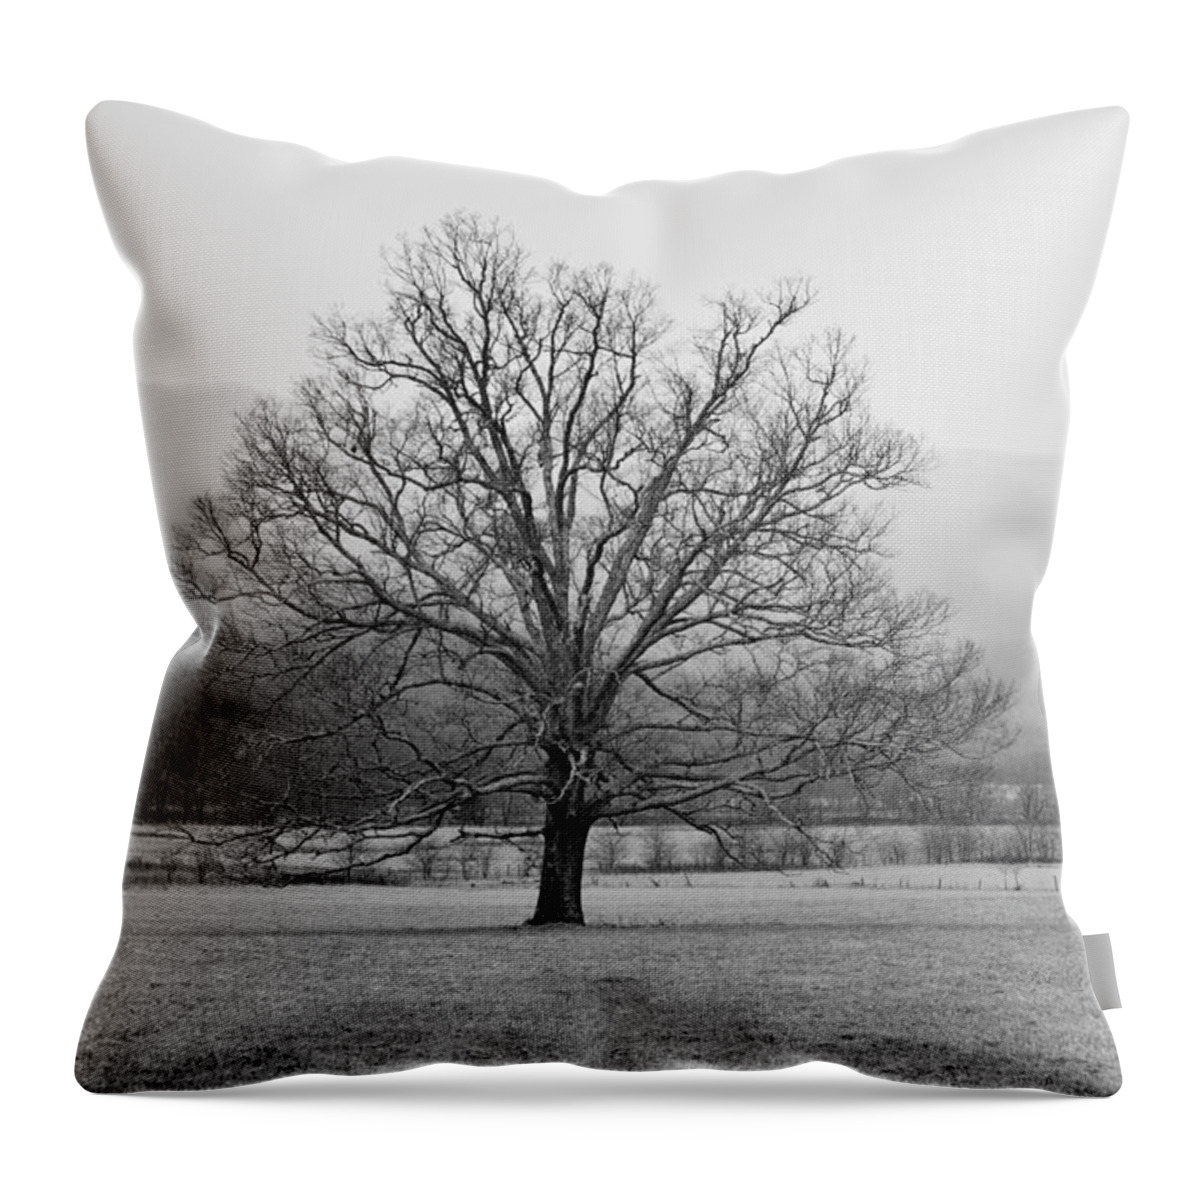 Nunweiler Throw Pillow featuring the photograph Cades Cove 1 by Nunweiler Photography